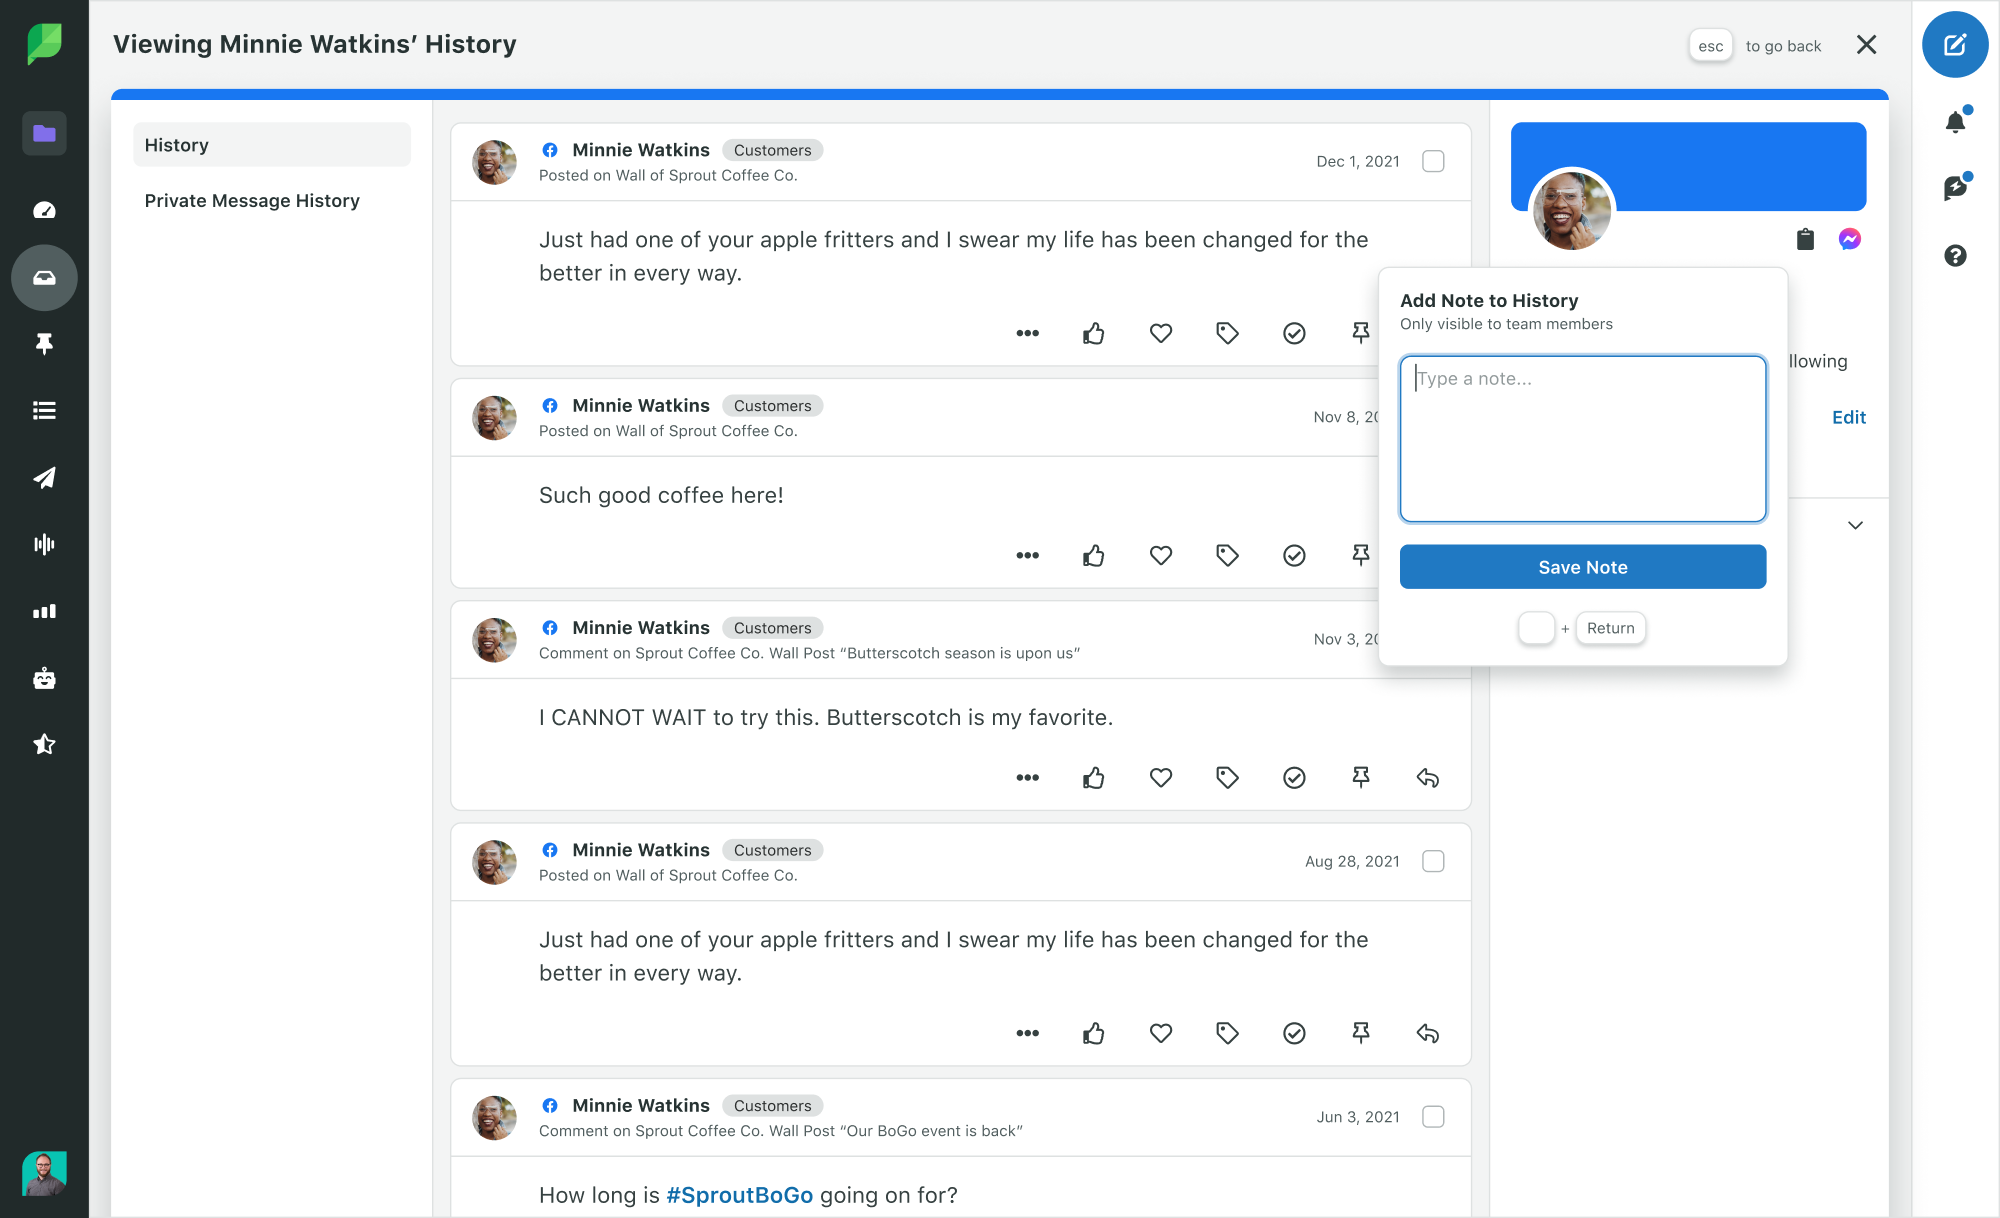 A screenshot of the Sprout Social desktop app. A contact profile is open, displaying interactions between a brand and a Facebook user named Minnie Watkins. The Add Note window is open on the contact profile. 